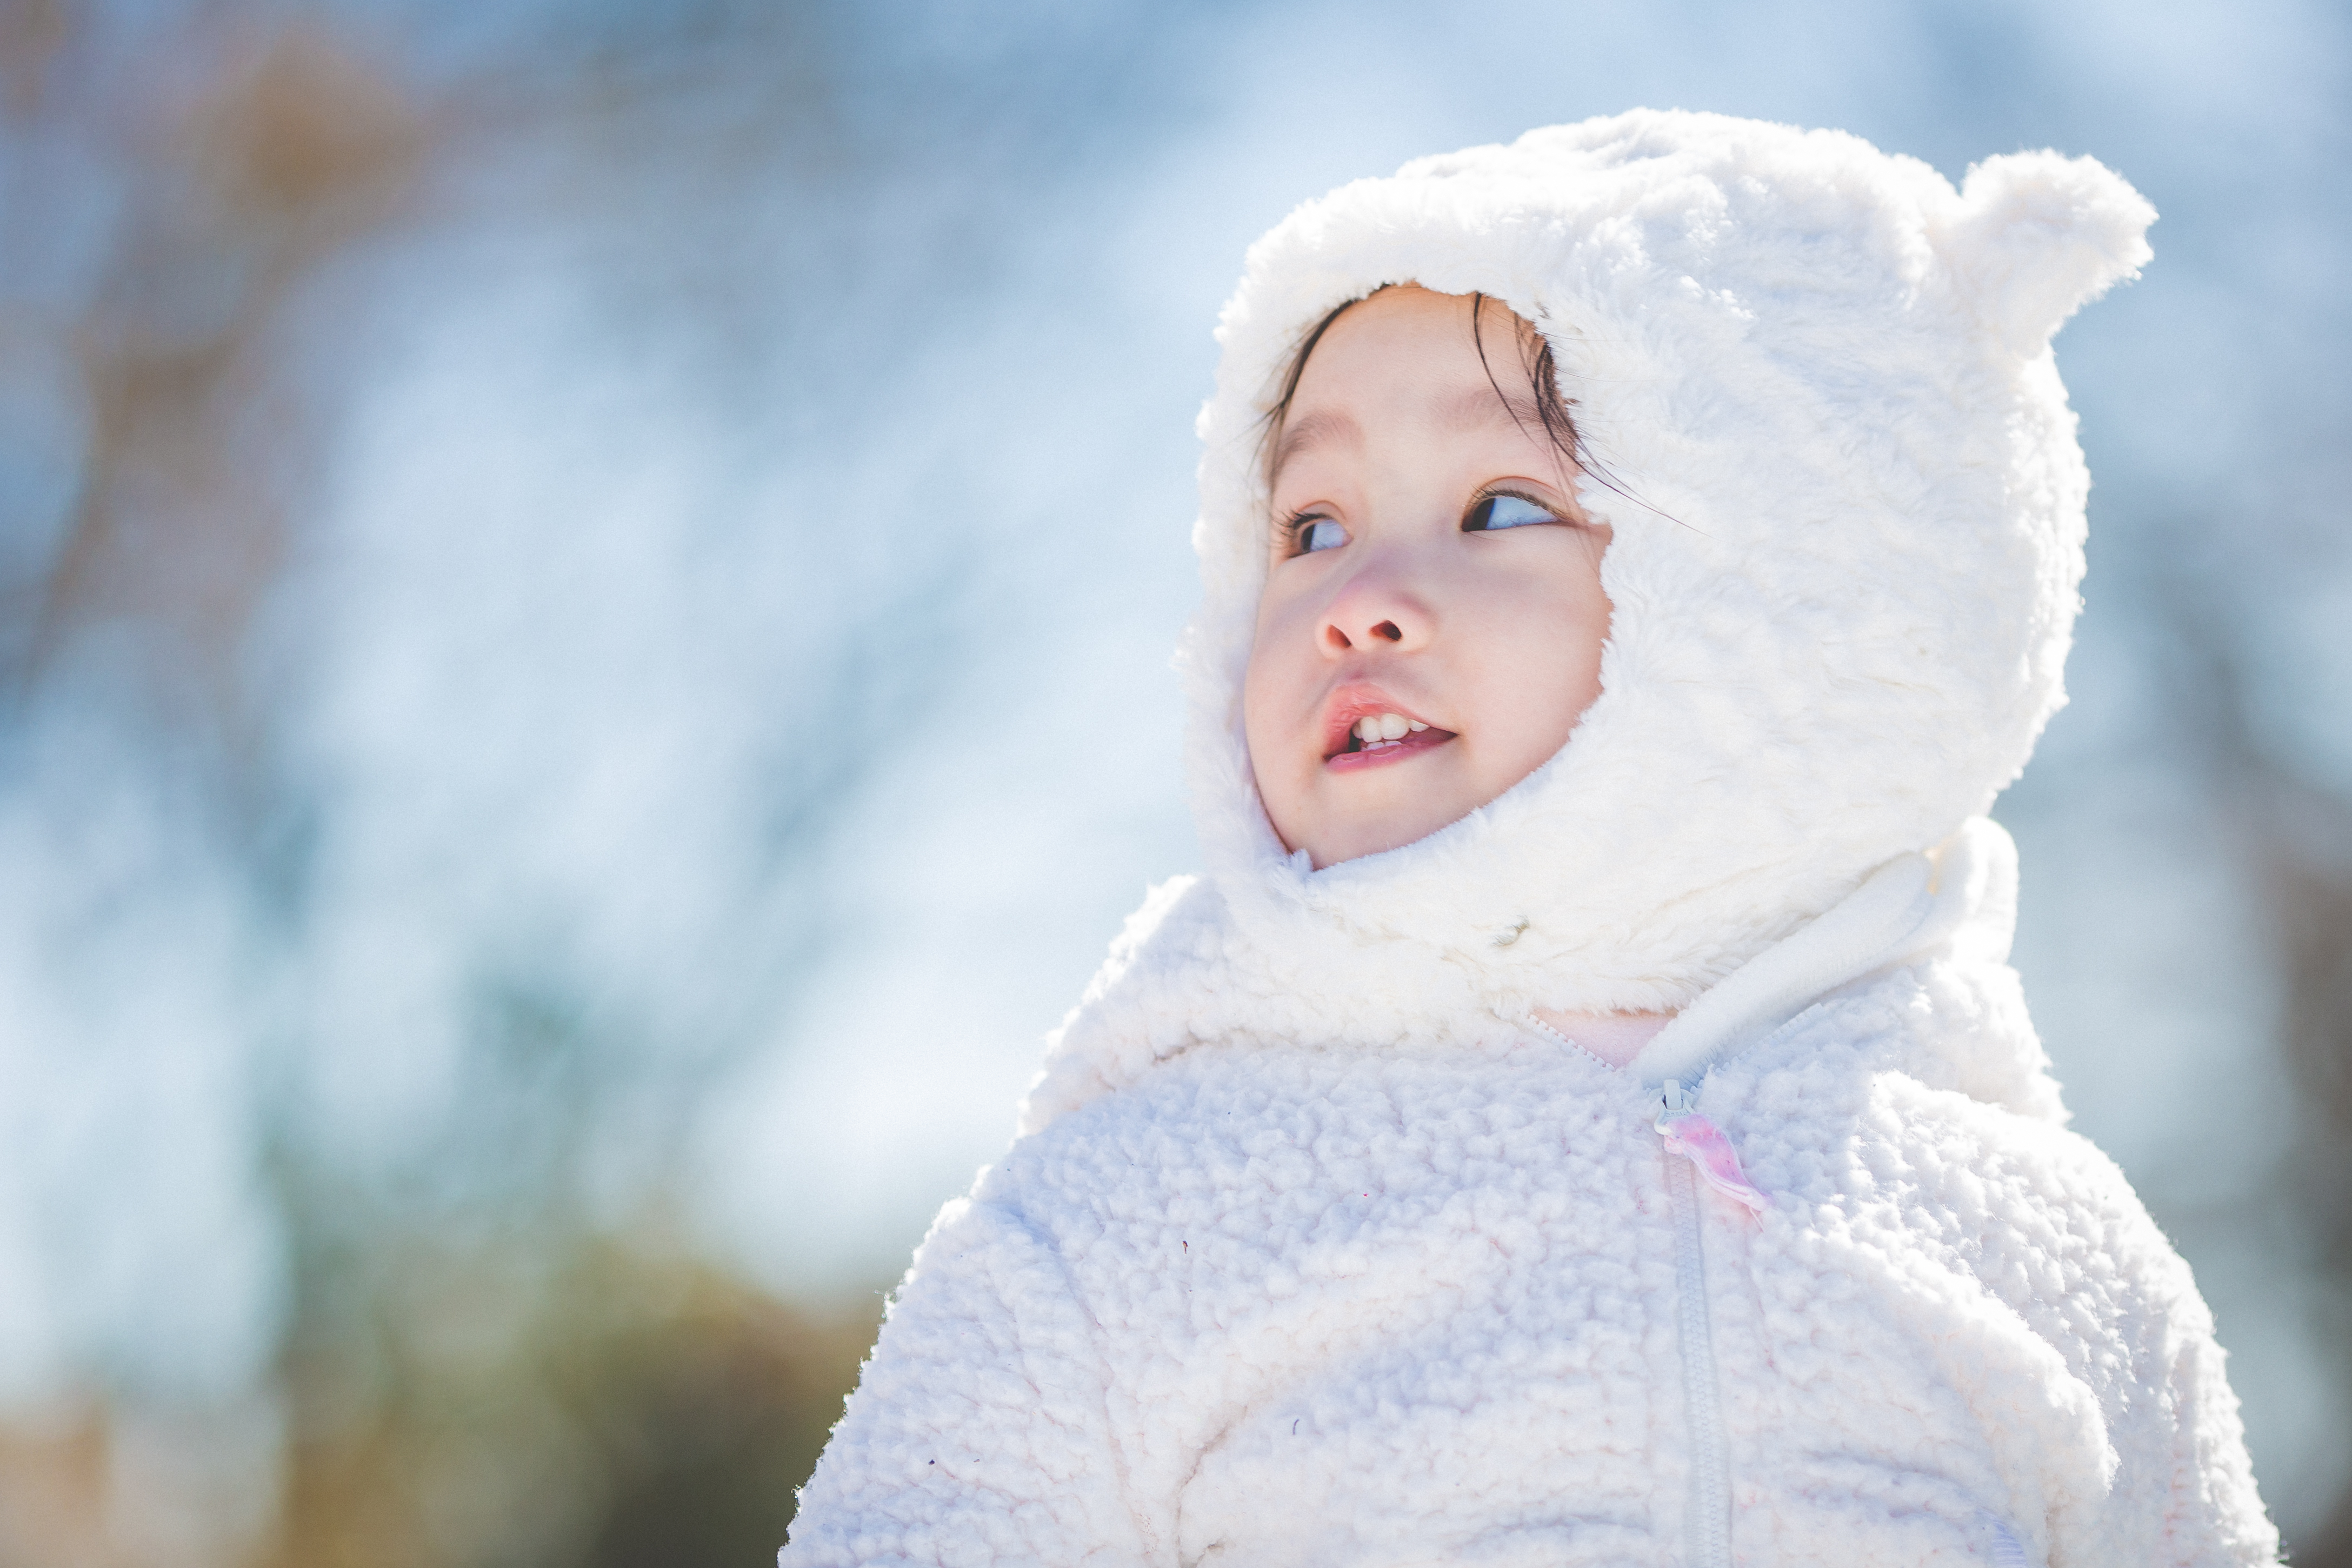 Wallpaper, white, Asian, snow, winter, blue, Canon, baby, bokeh, spring, Person, skin, child, cute, season, smile, 135mm, f portrait photography, toddler, infant, cub 4351x2901